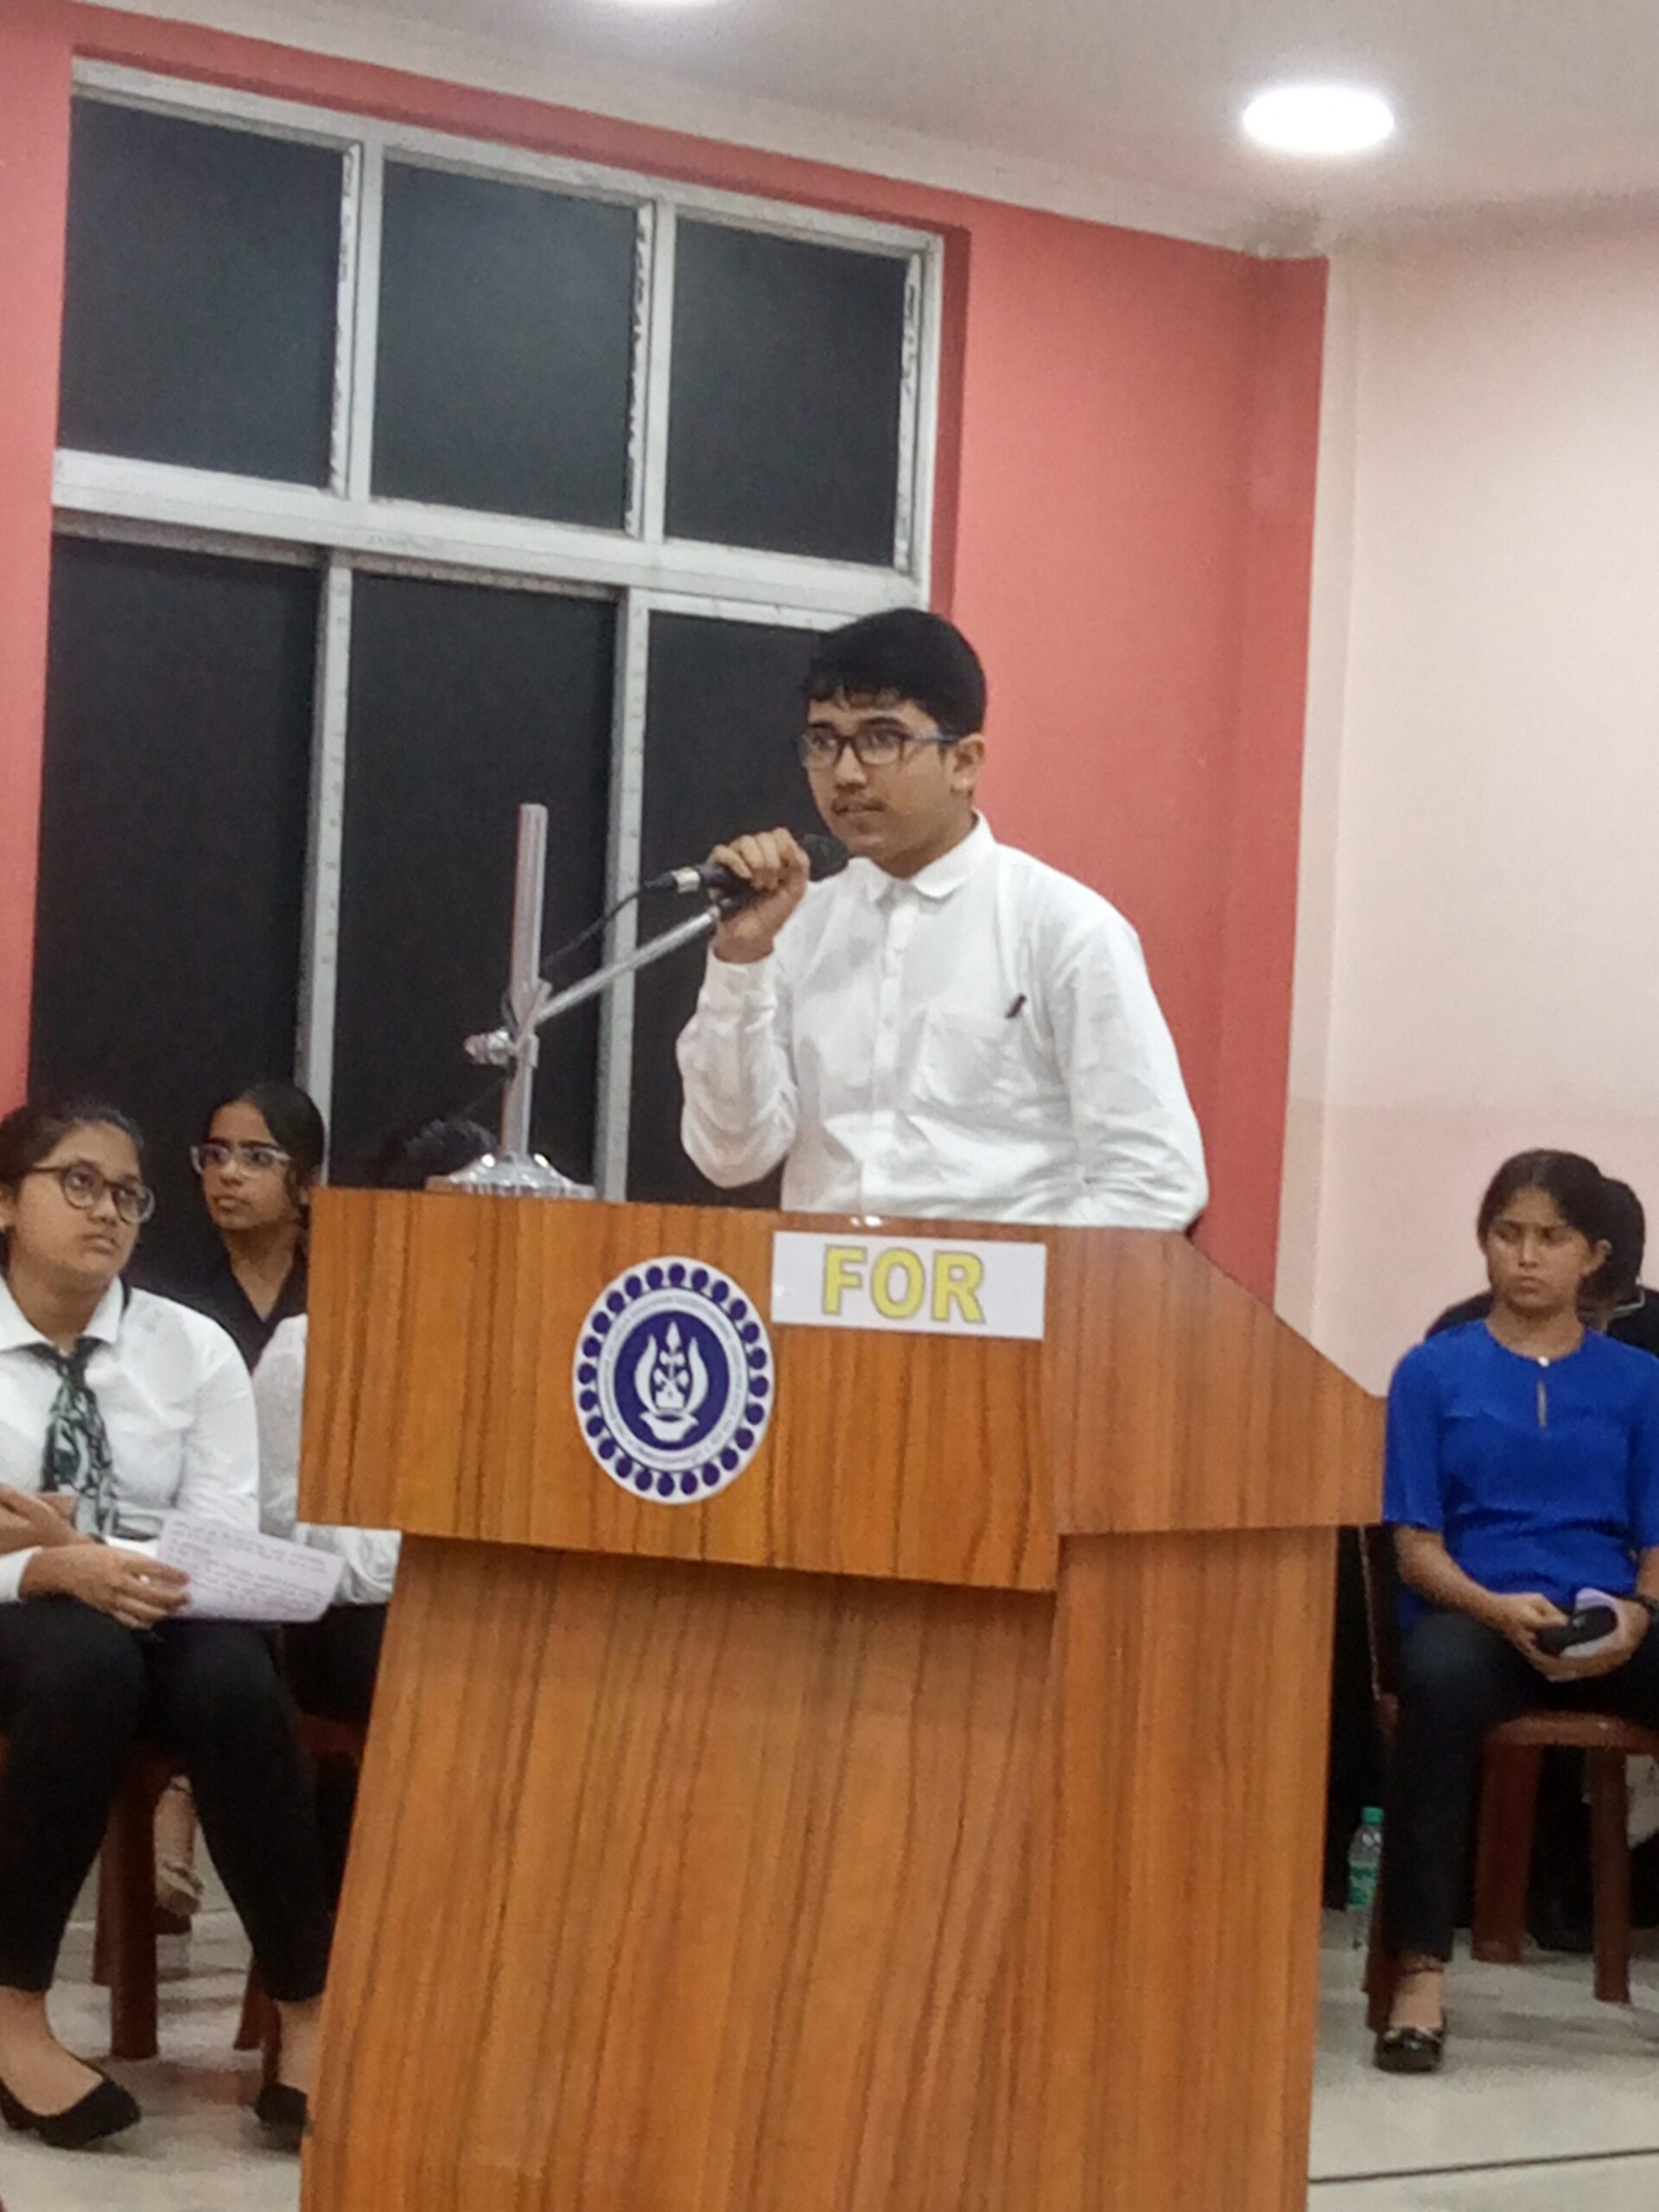 THE FRANK ANTHONY MEMORIAL ALL-INDIA INTER-SCHOOL DEBATE COMPETITION Category 2 Stage 1 2